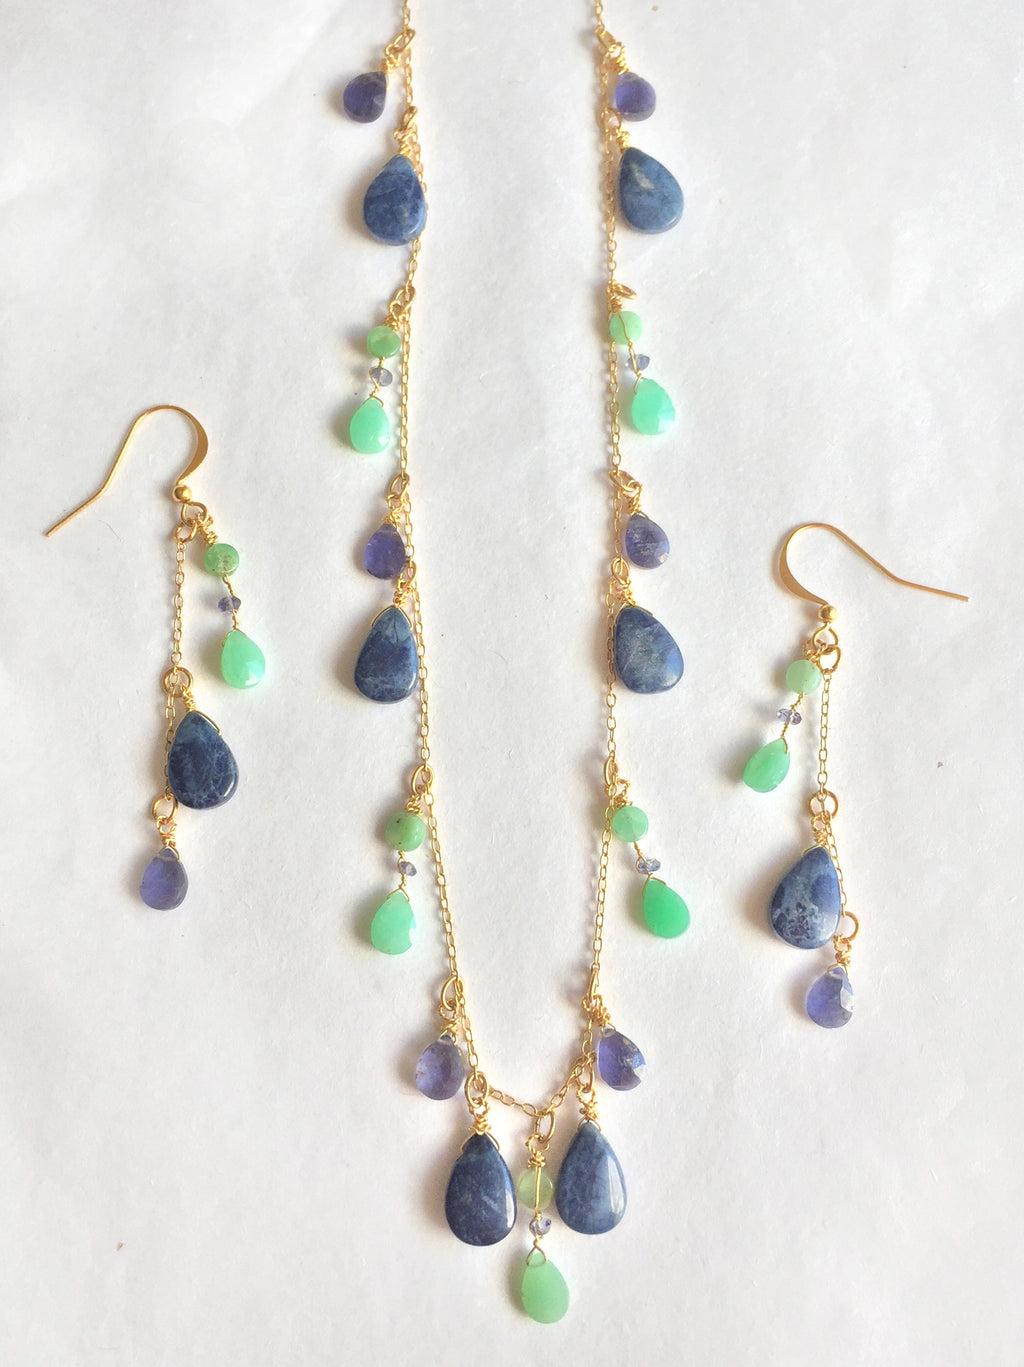 unique dangle earrings and necklace with lapis, iolite, chrsoprase and gold